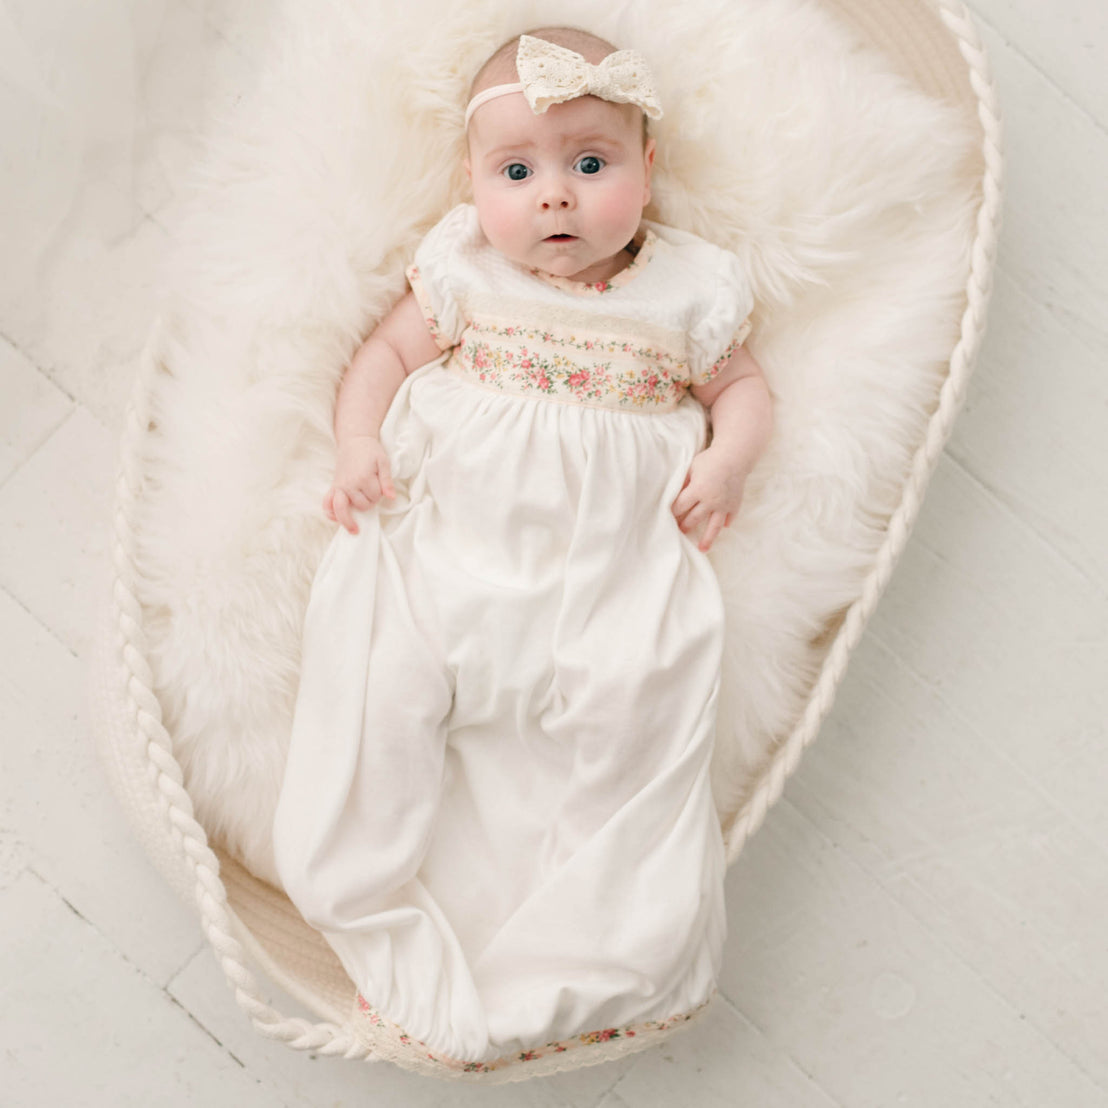 Newborn baby girl in a crib and wearing the "Blush" Eloise Layette Gown with matching Eloise Headband.